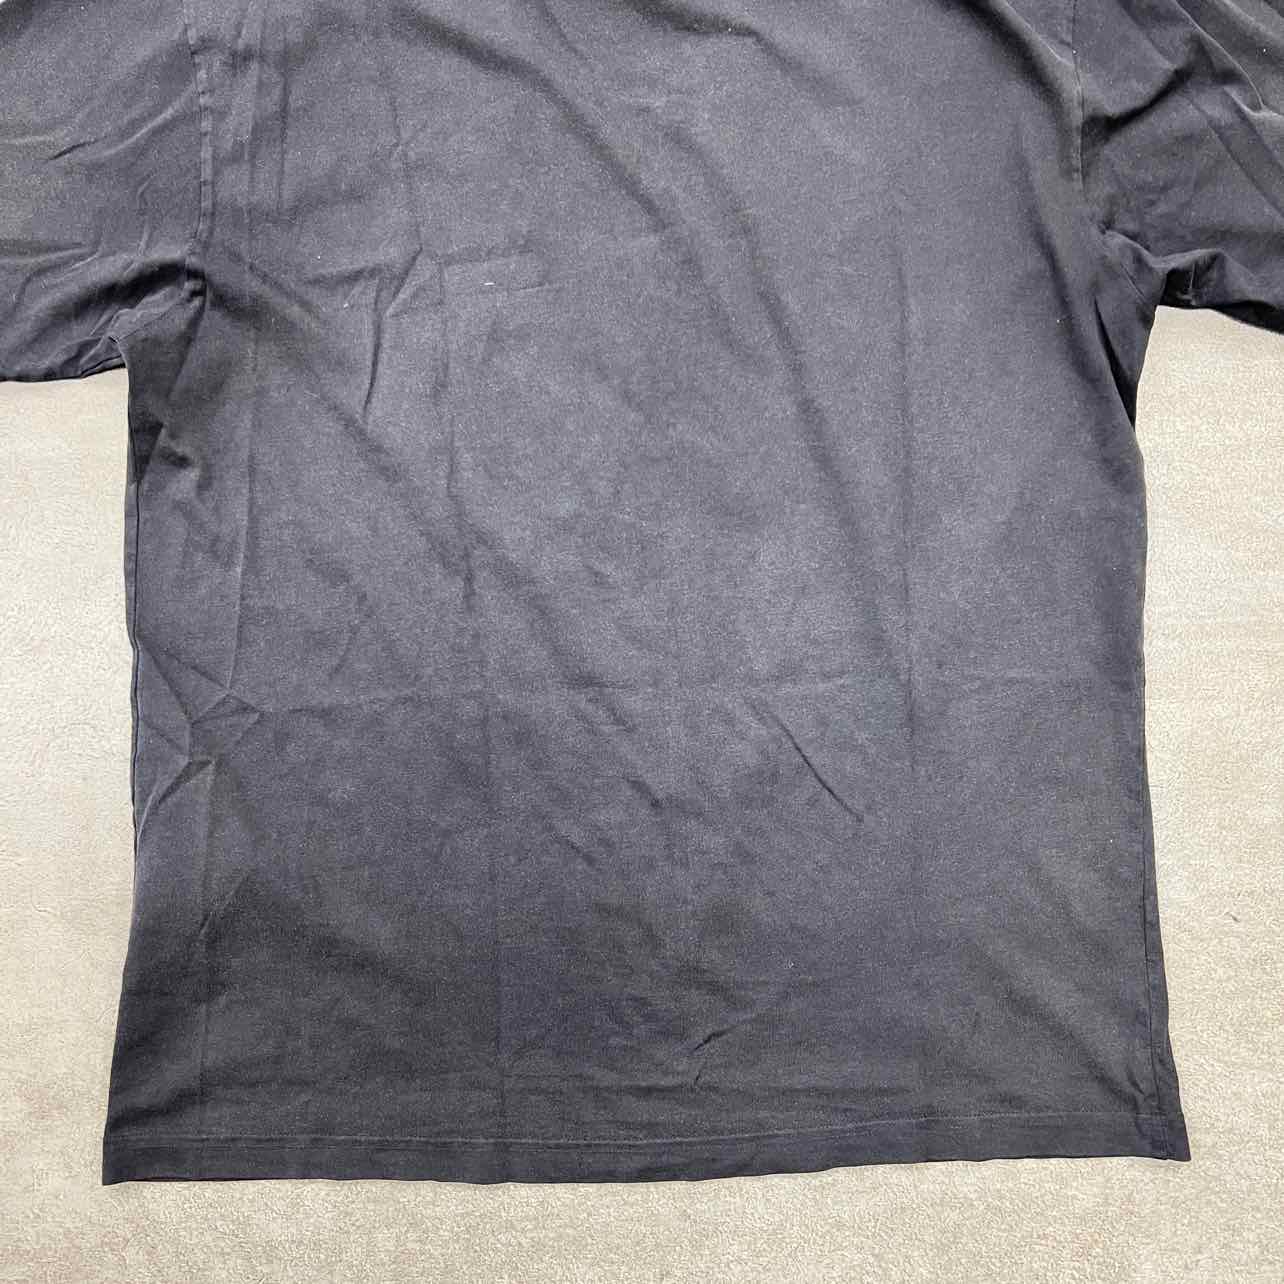 Kith T-Shirt &quot;GOODFELLAS&quot; Black Used Size L